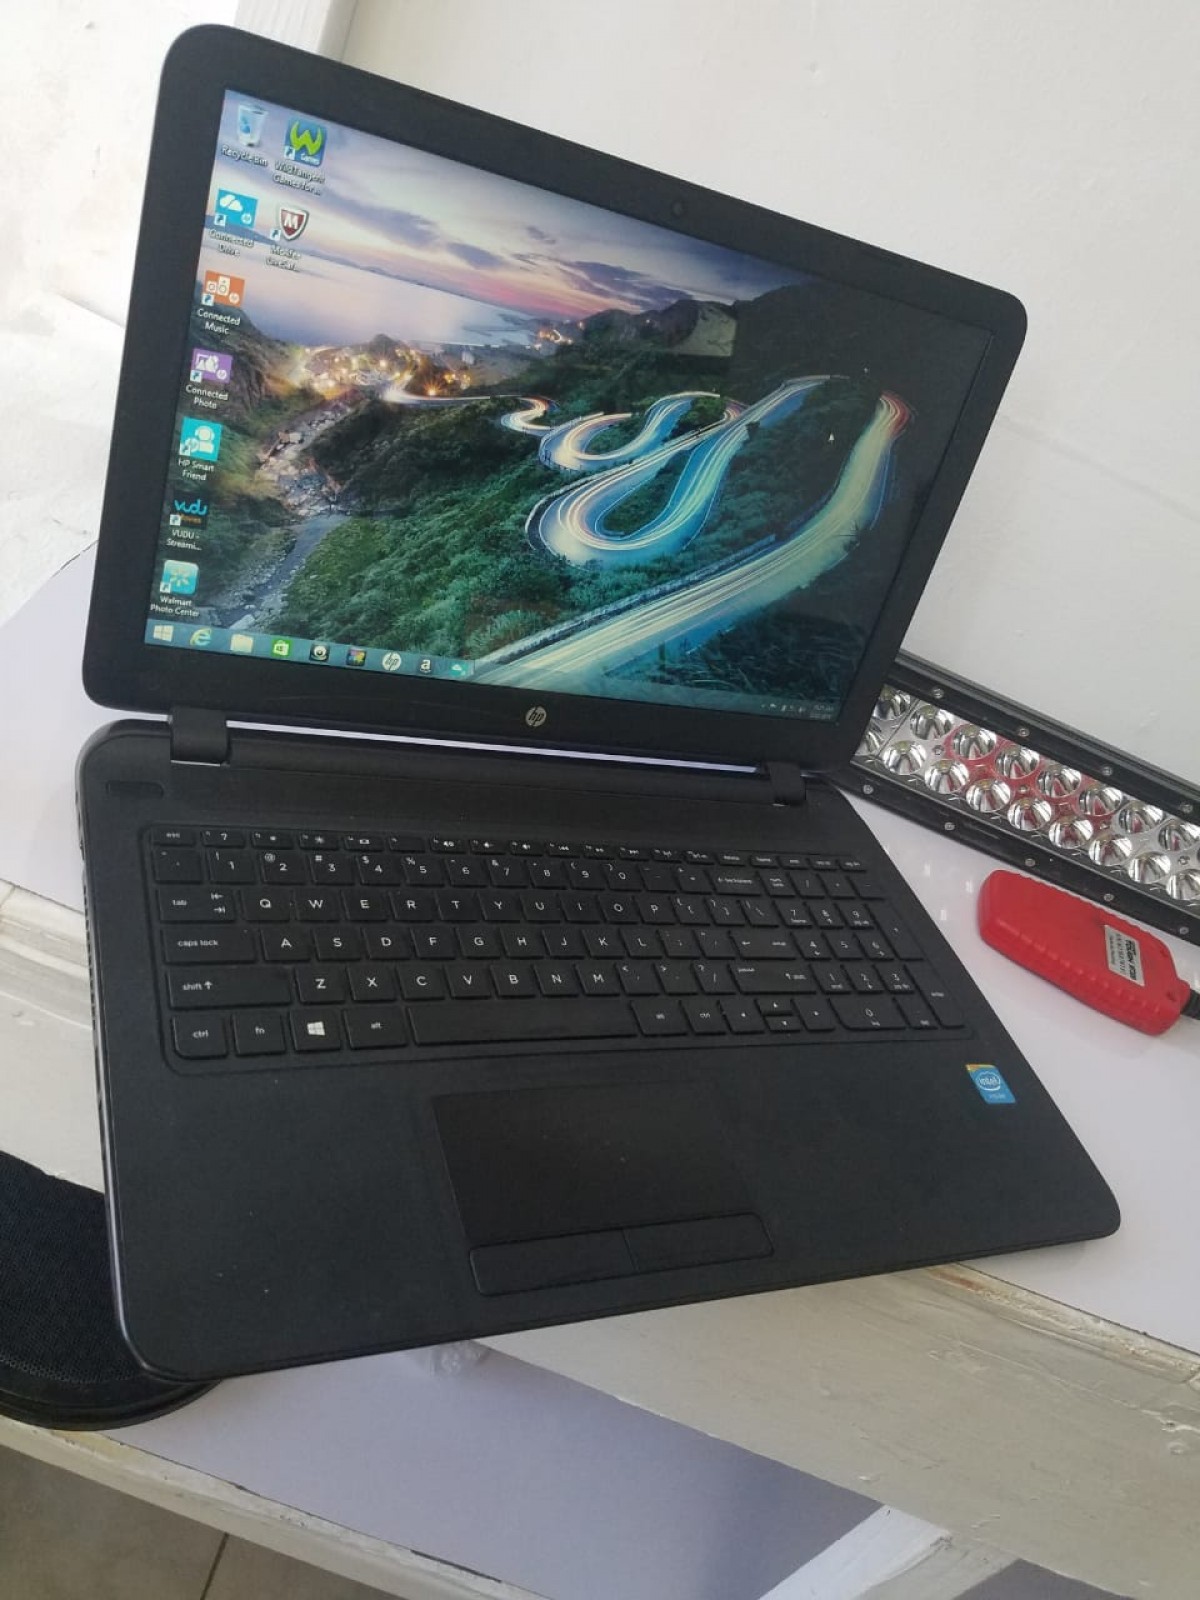 HP 15 Notebook Pc for sale in Portmore St Catherine - Laptops